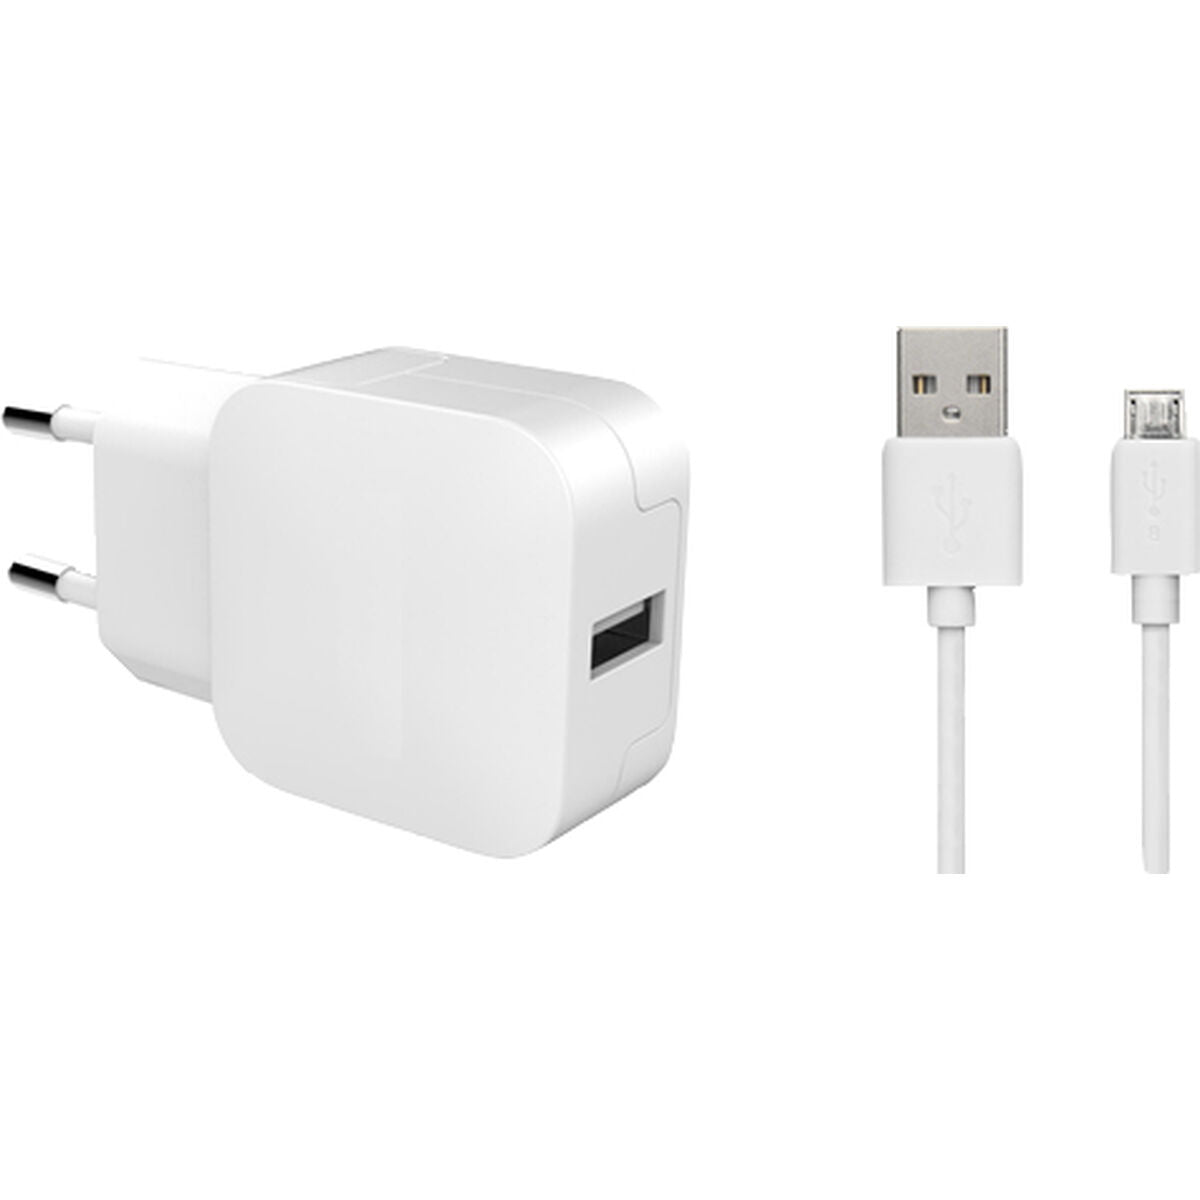 Wall Charger BigBen Connected CSCBLMIC2.1AW White (1 Unit)